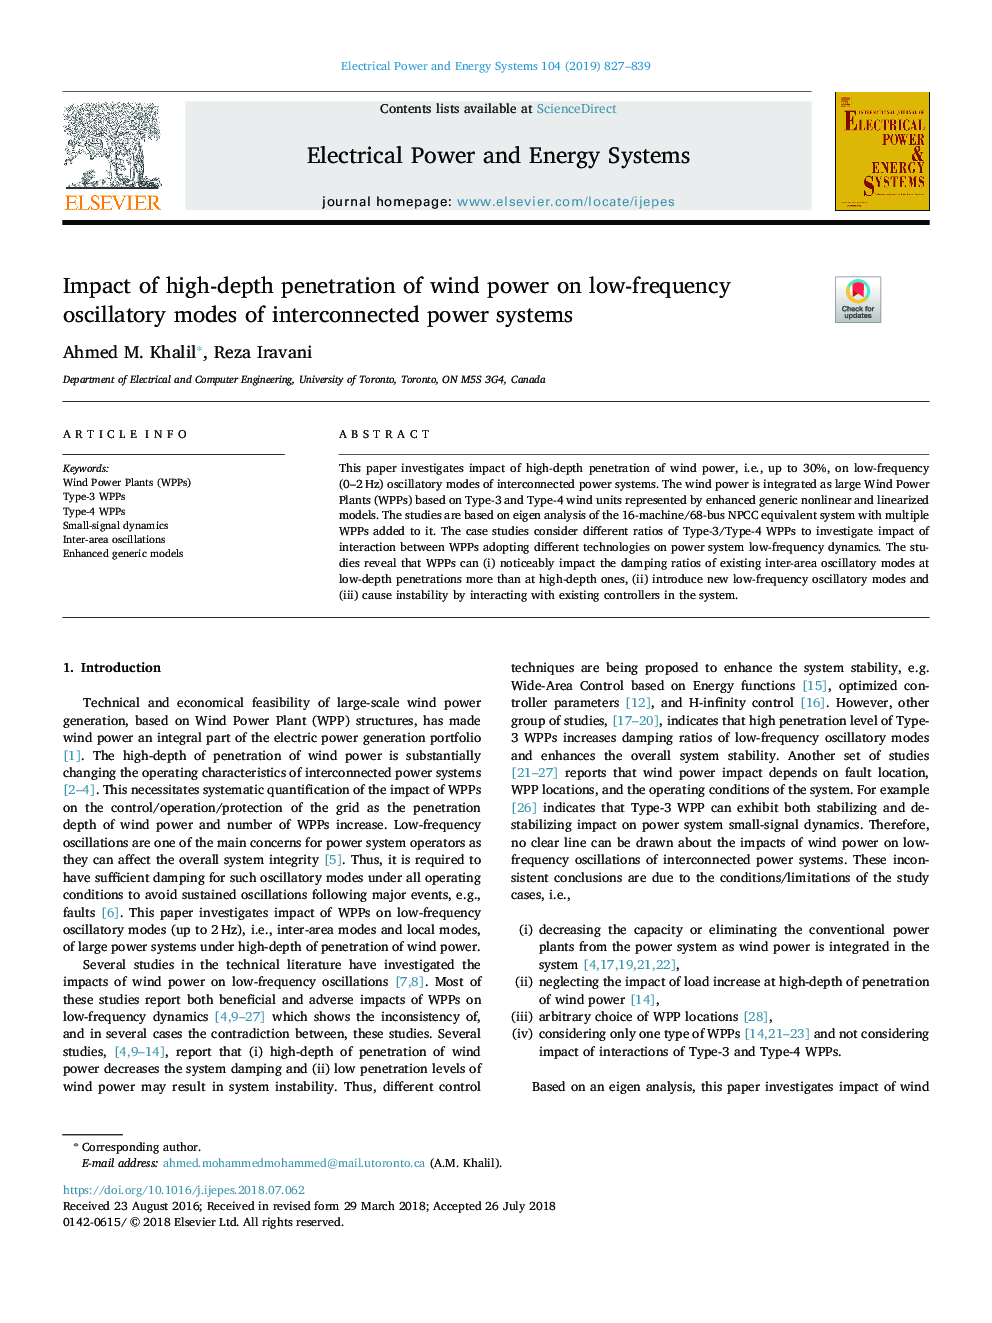 Impact of high-depth penetration of wind power on low-frequency oscillatory modes of interconnected power systems